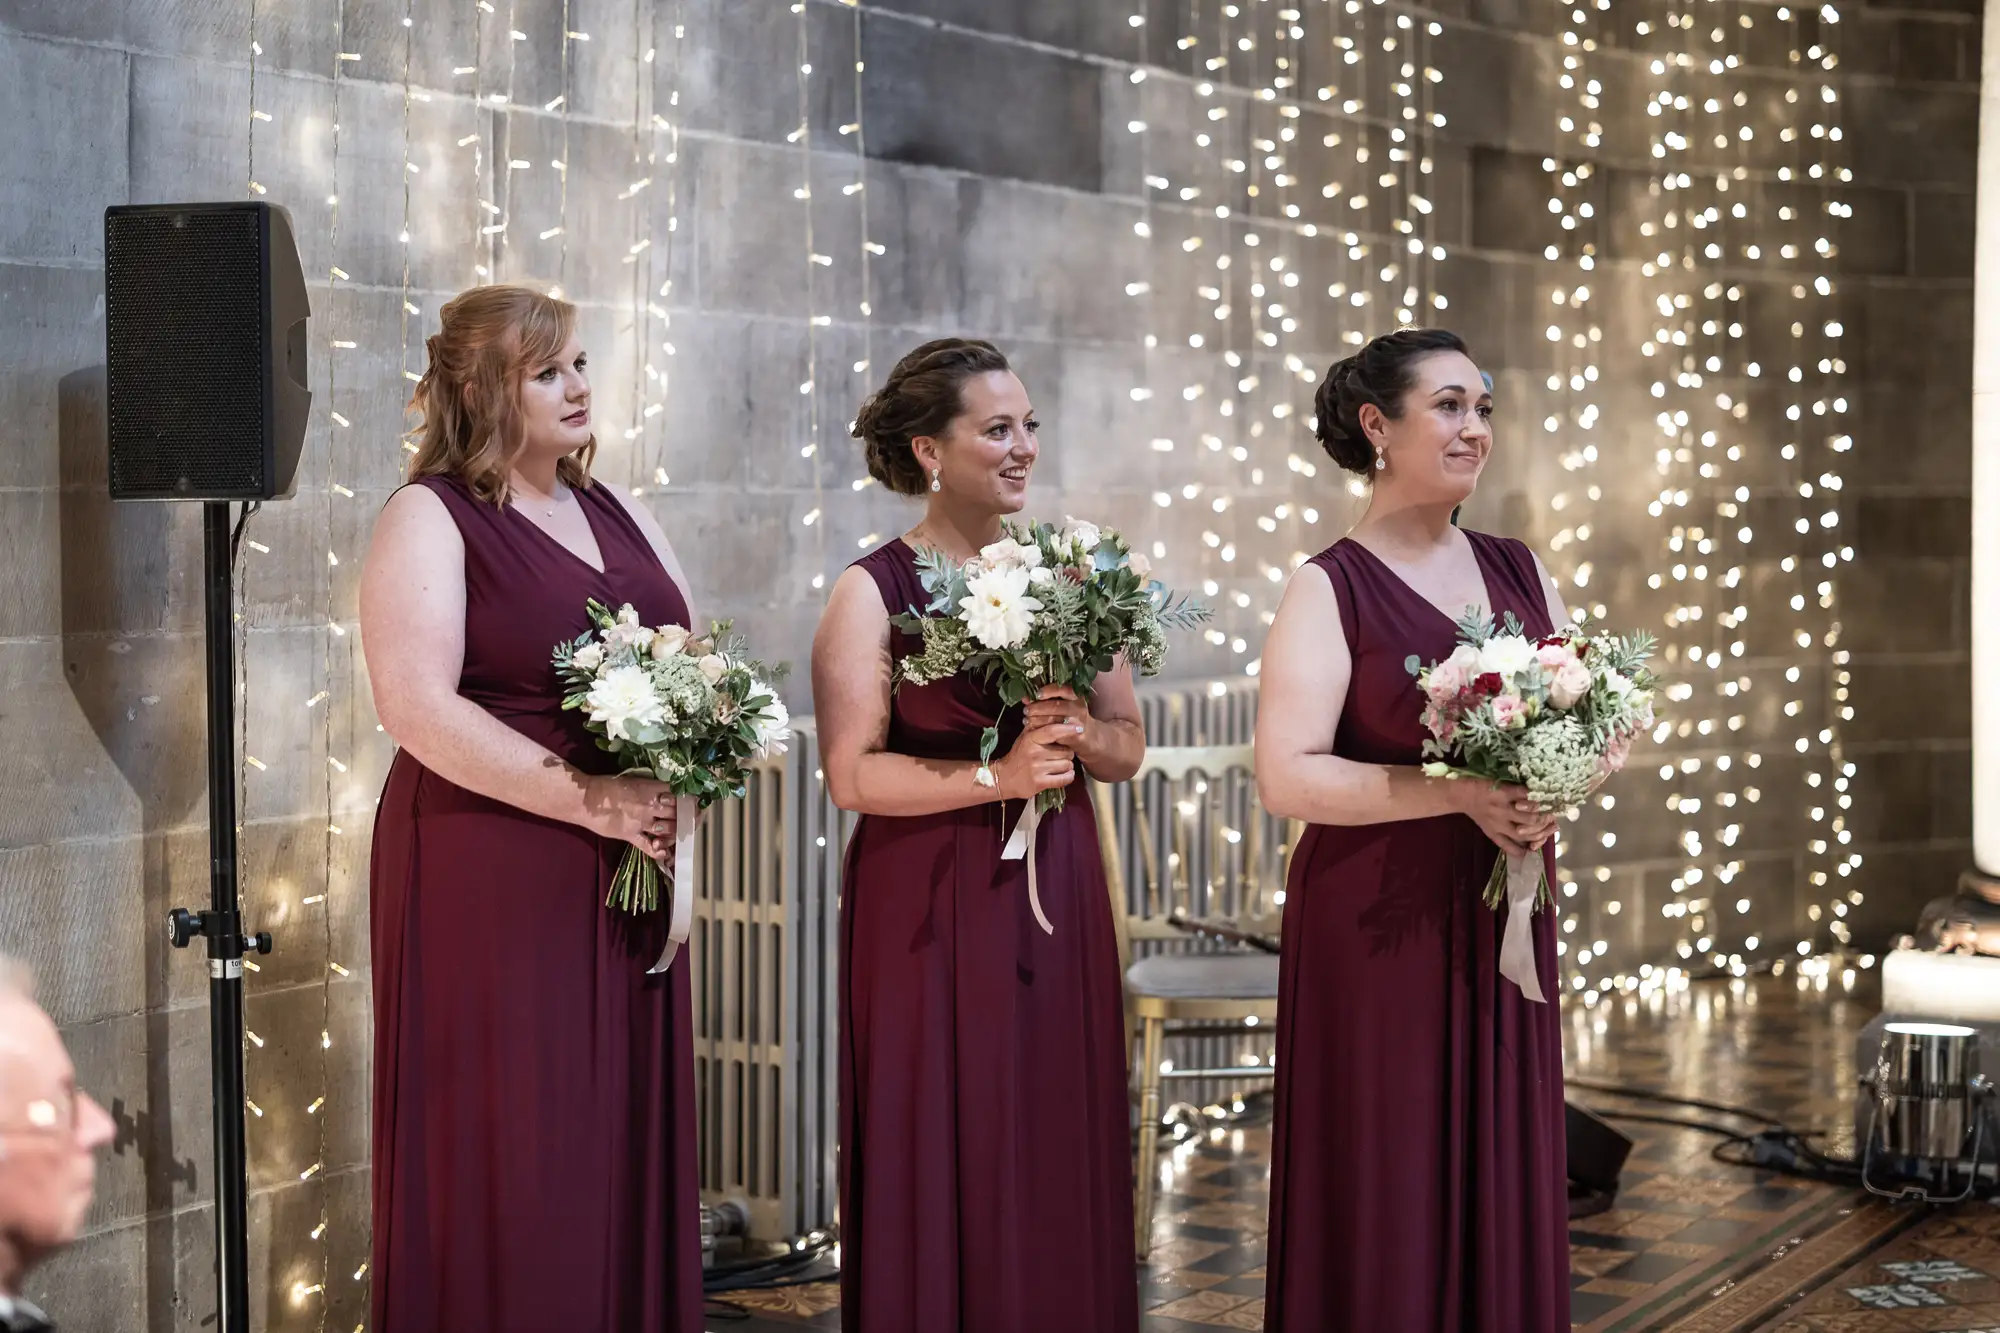 Three bridesmaids in burgundy dresses holding bouquets, standing in front of a curtain of fairy lights at a wedding.